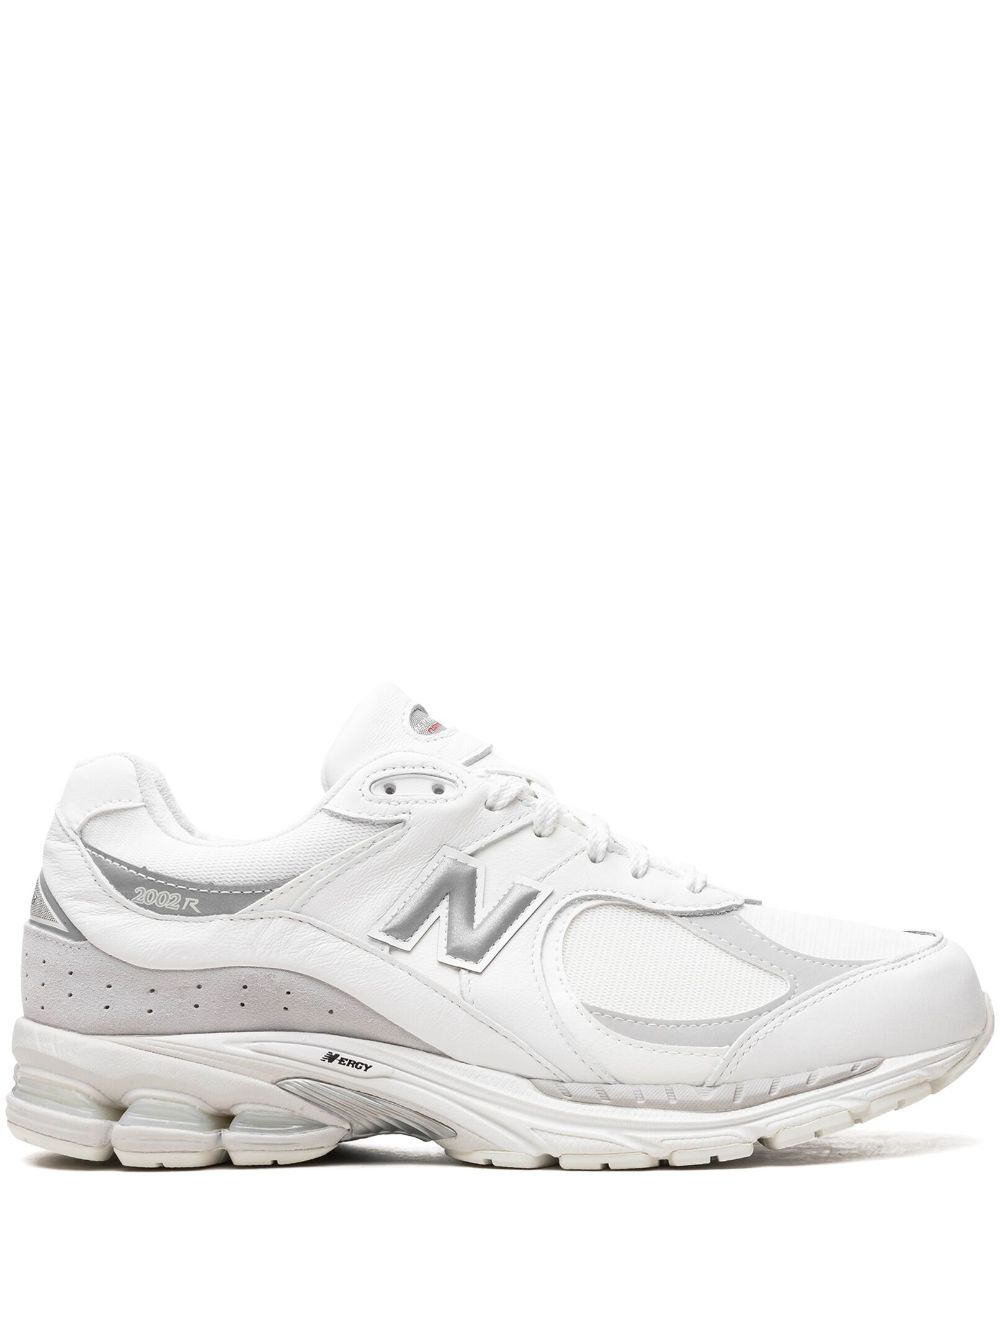 New Balance 2002RX running sneakers - White